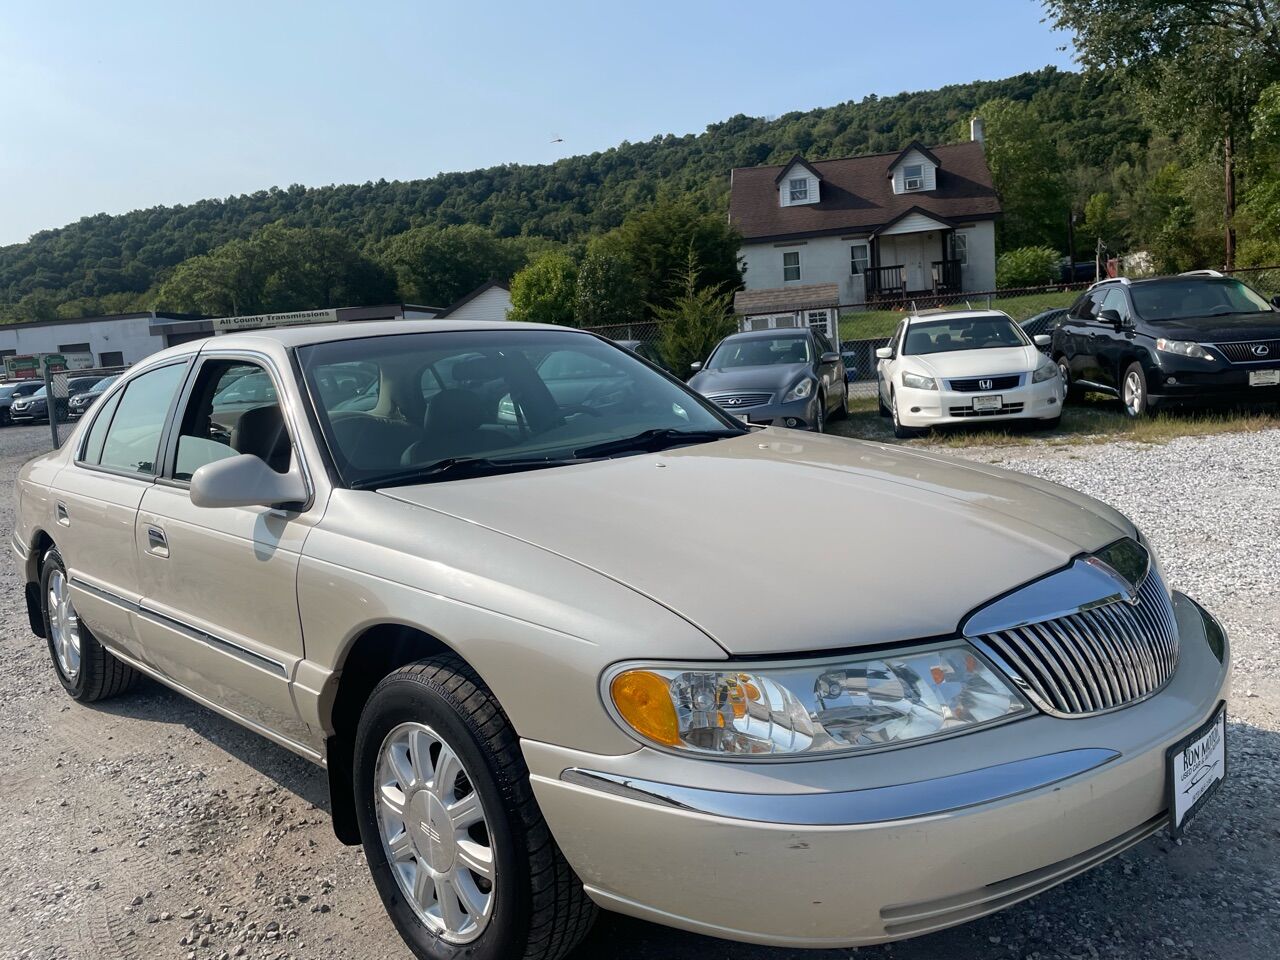 1999 Lincoln Continental For Sale In Easton, PA - Carsforsale.com®